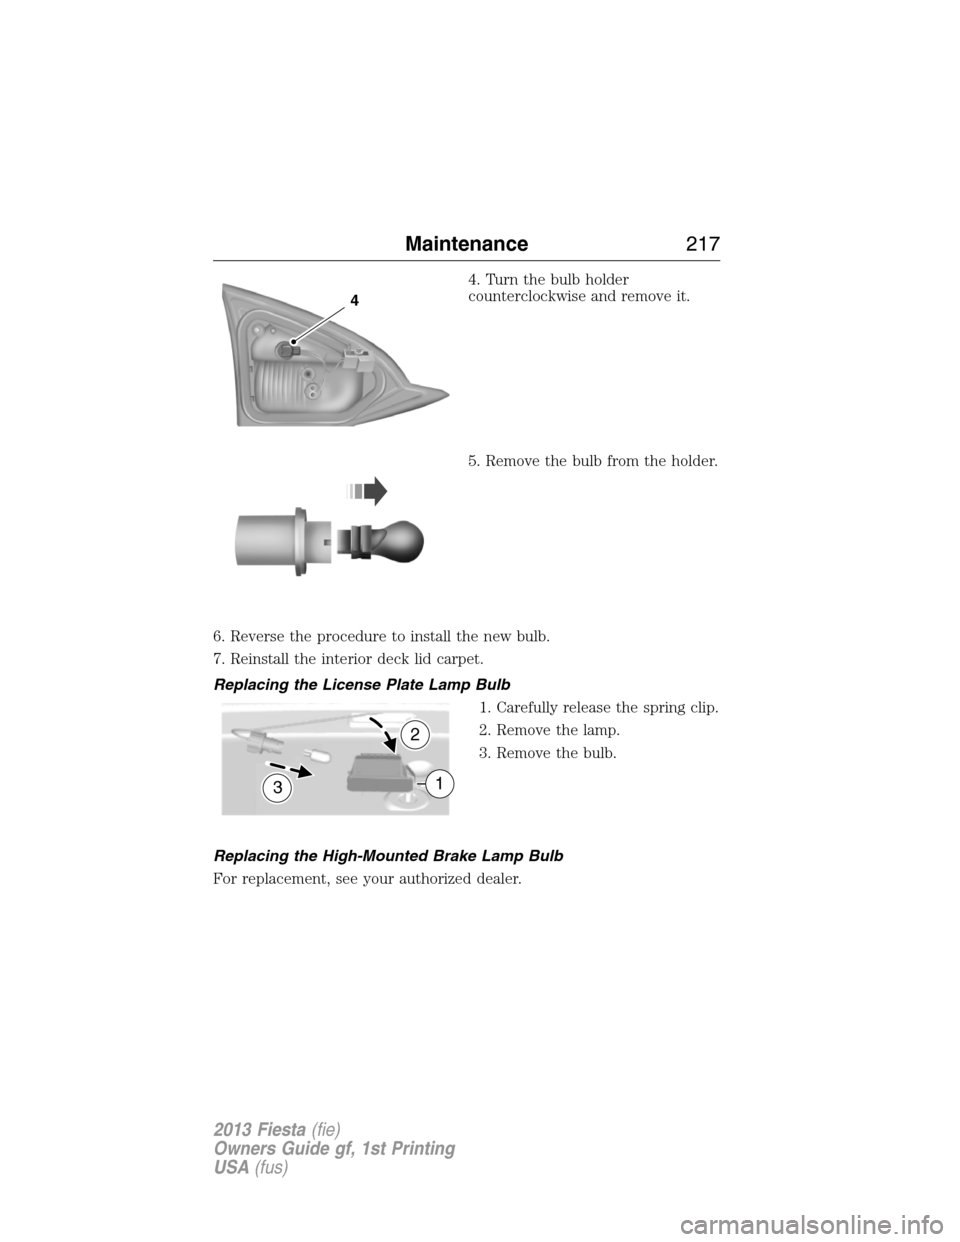 FORD FIESTA 2013 7.G Owners Guide 4. Turn the bulb holder
counterclockwise and remove it.
5. Remove the bulb from the holder.
6. Reverse the procedure to install the new bulb.
7. Reinstall the interior deck lid carpet.
Replacing the L